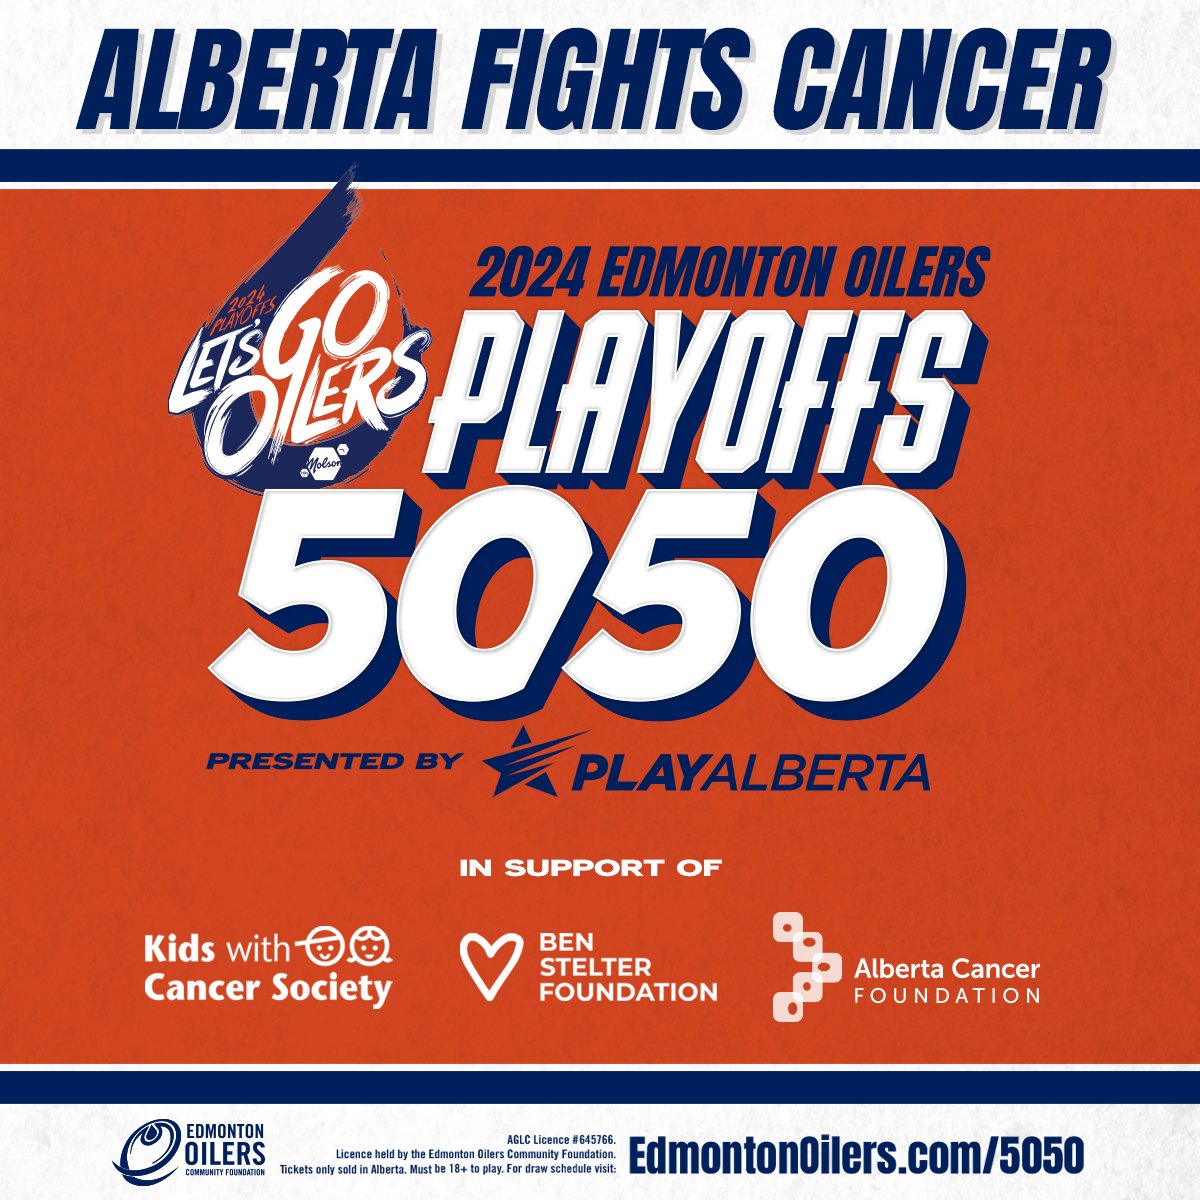 Congrats to the holder of #Oilers 50/50 ticket A-103174421 who's won $1,000 for @IceDistrictAuth, the holder of A-100846409 who's scored $15,000 cash & the holder of A-106198559 who's hitting the road in a brand new Ford Bronco! 🚙 🎟 EdmontonOilers.com/5050tw